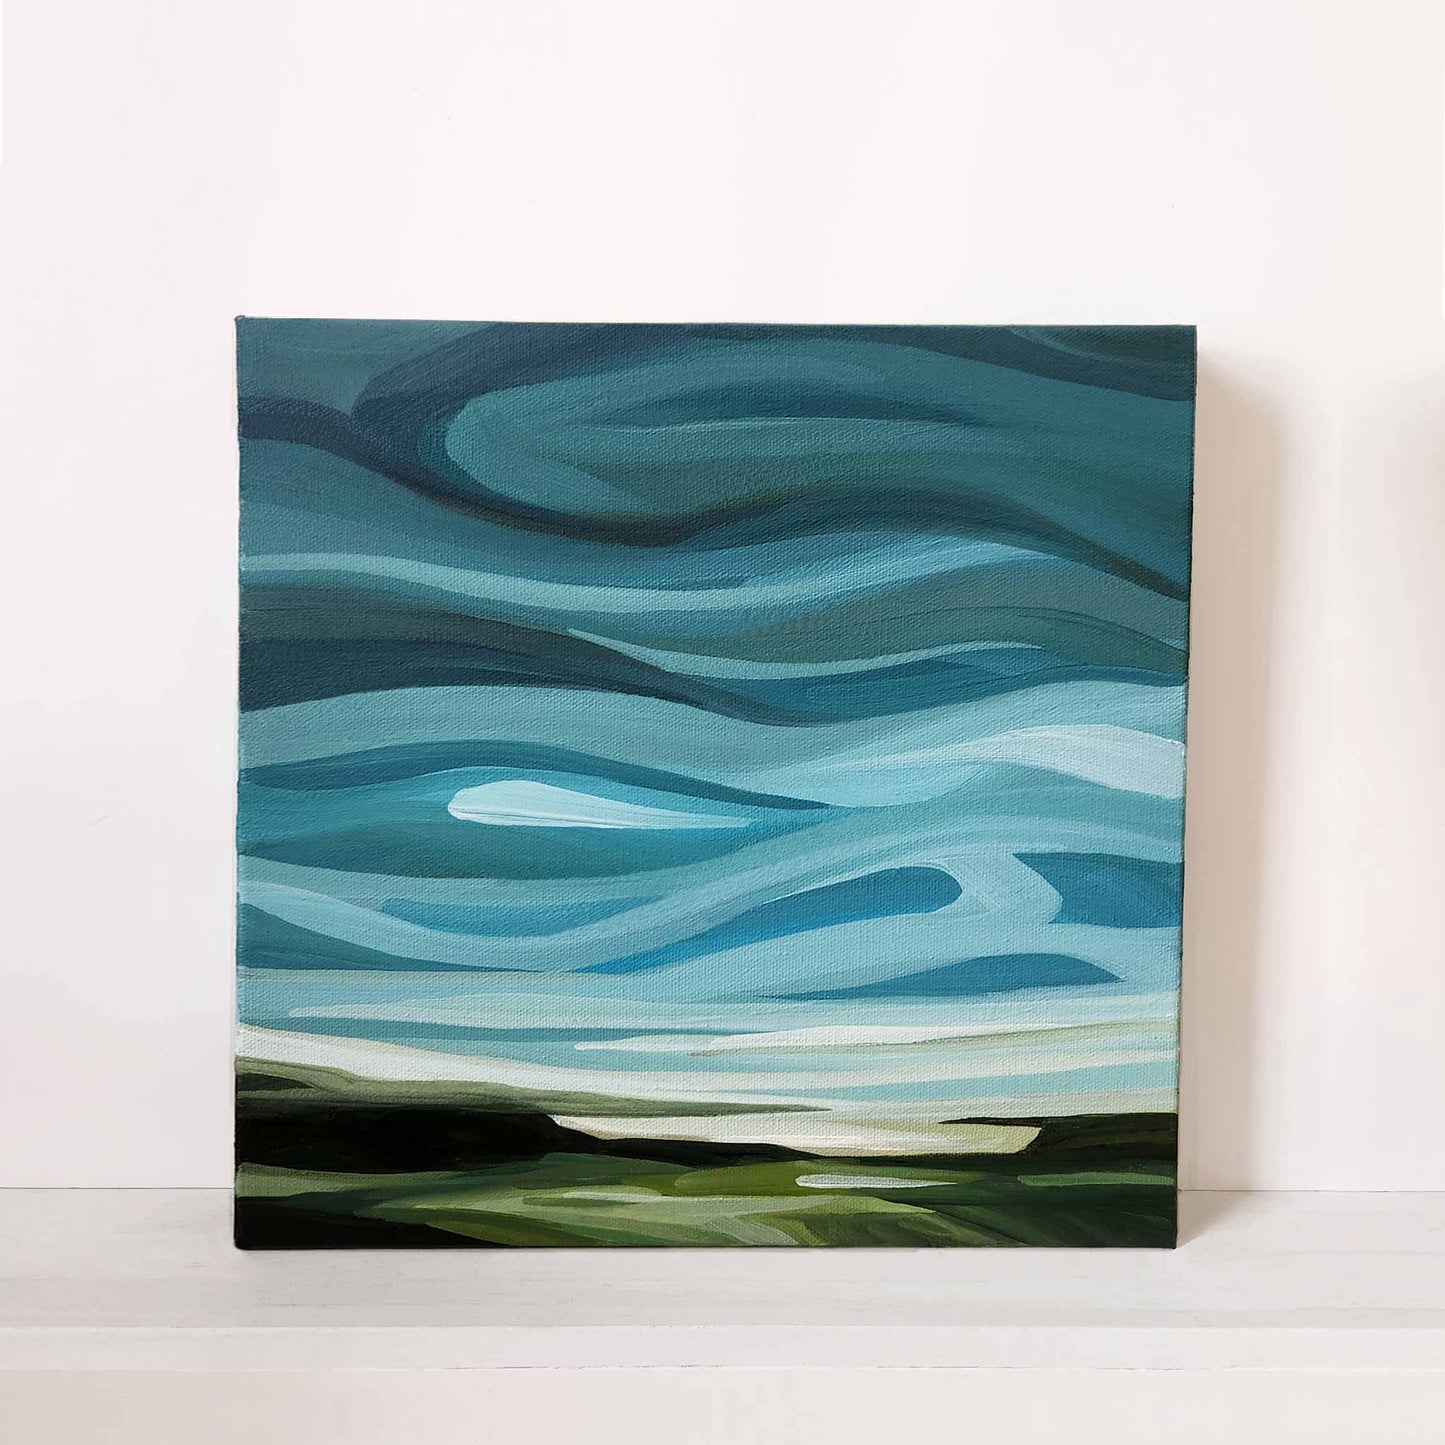 the shape of wind painted in the teals and blue of an abstract sky painting